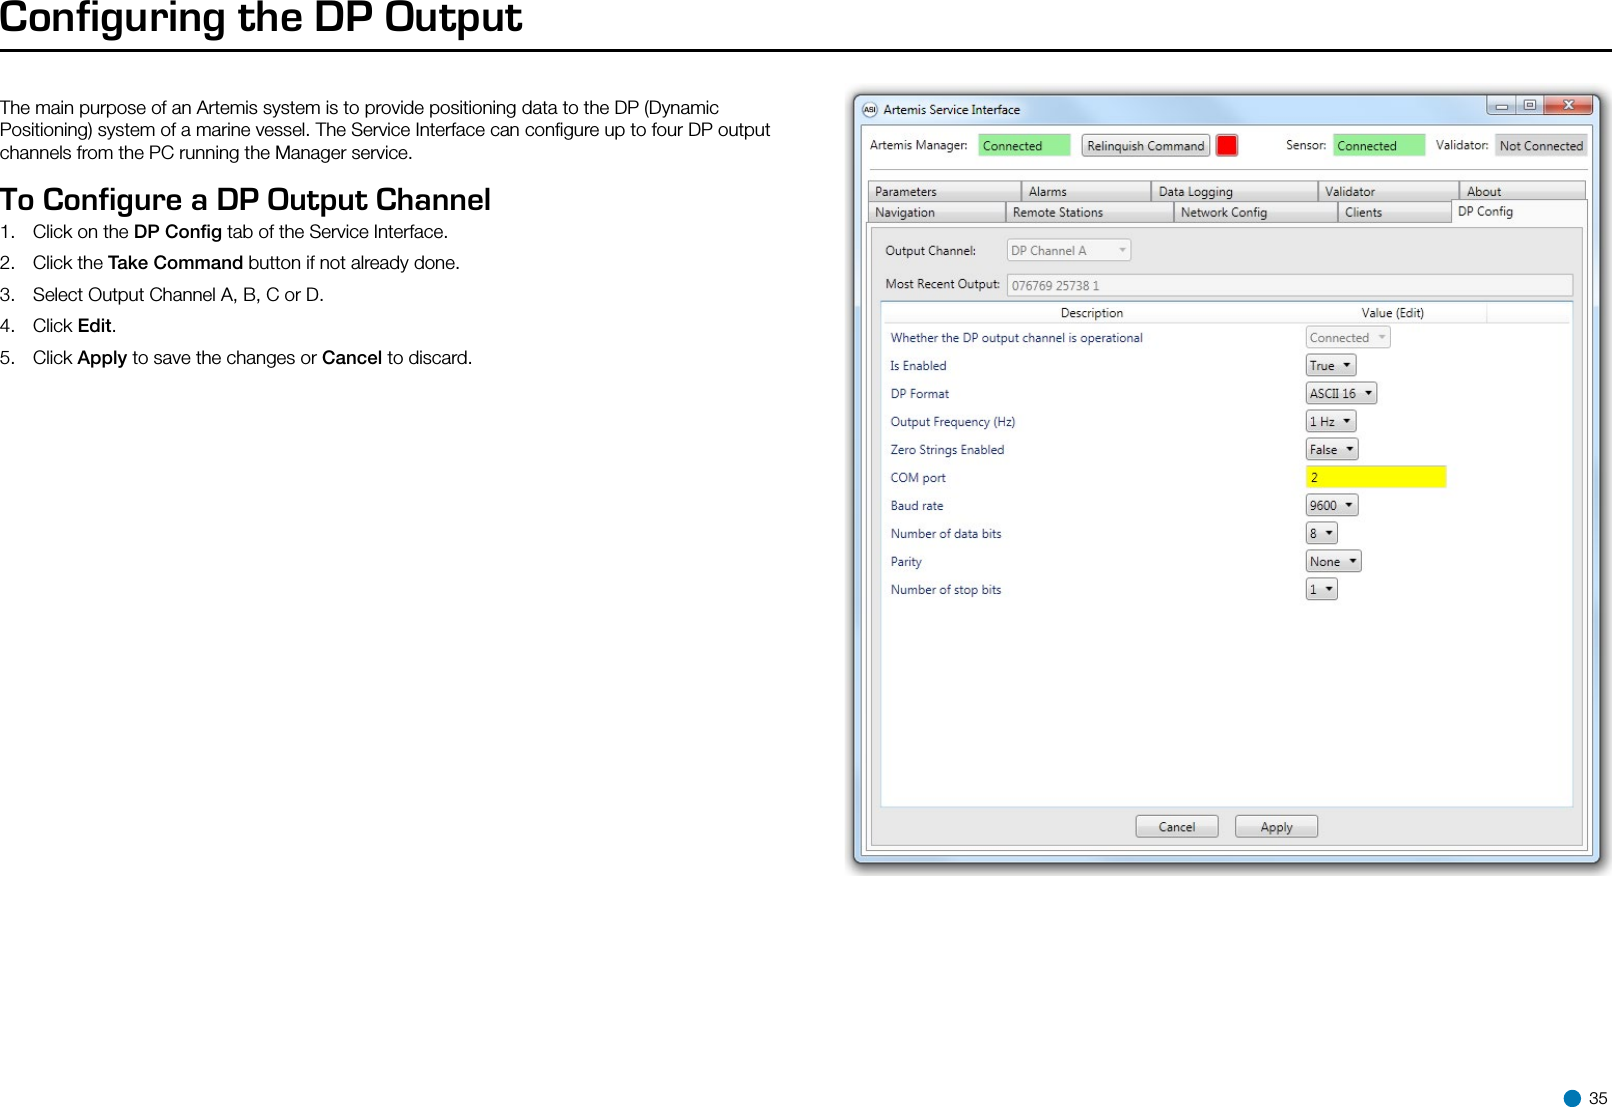 Configuring the DP OutputTo Configure a DP Output Channel  1.  Click on the DP Conﬁg tab of the Service Interface. 2.  Click the Take Command button if not already done.3.  Select Output Channel A, B, C or D.4.  Click Edit.5.  Click Apply to save the changes or Cancel to discard. 35The main purpose of an Artemis system is to provide positioning data to the DP (Dynamic Positioning) system of a marine vessel. The Service Interface can conﬁgure up to four DP output channels from the PC running the Manager service. 